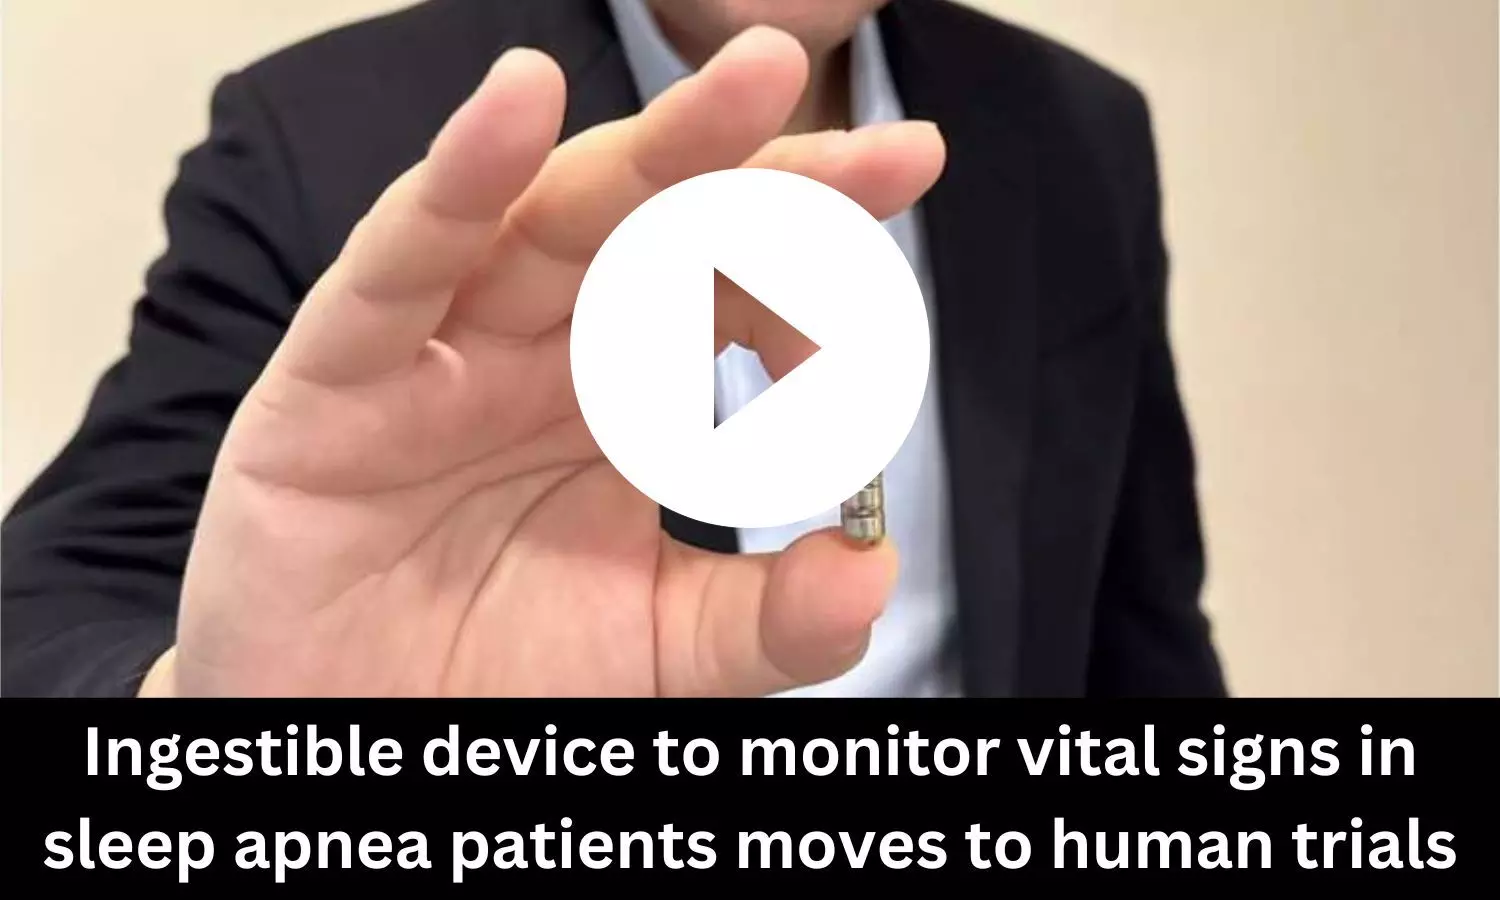 Ingestible device to monitor vital signs in sleep apnea patients moves to human trials